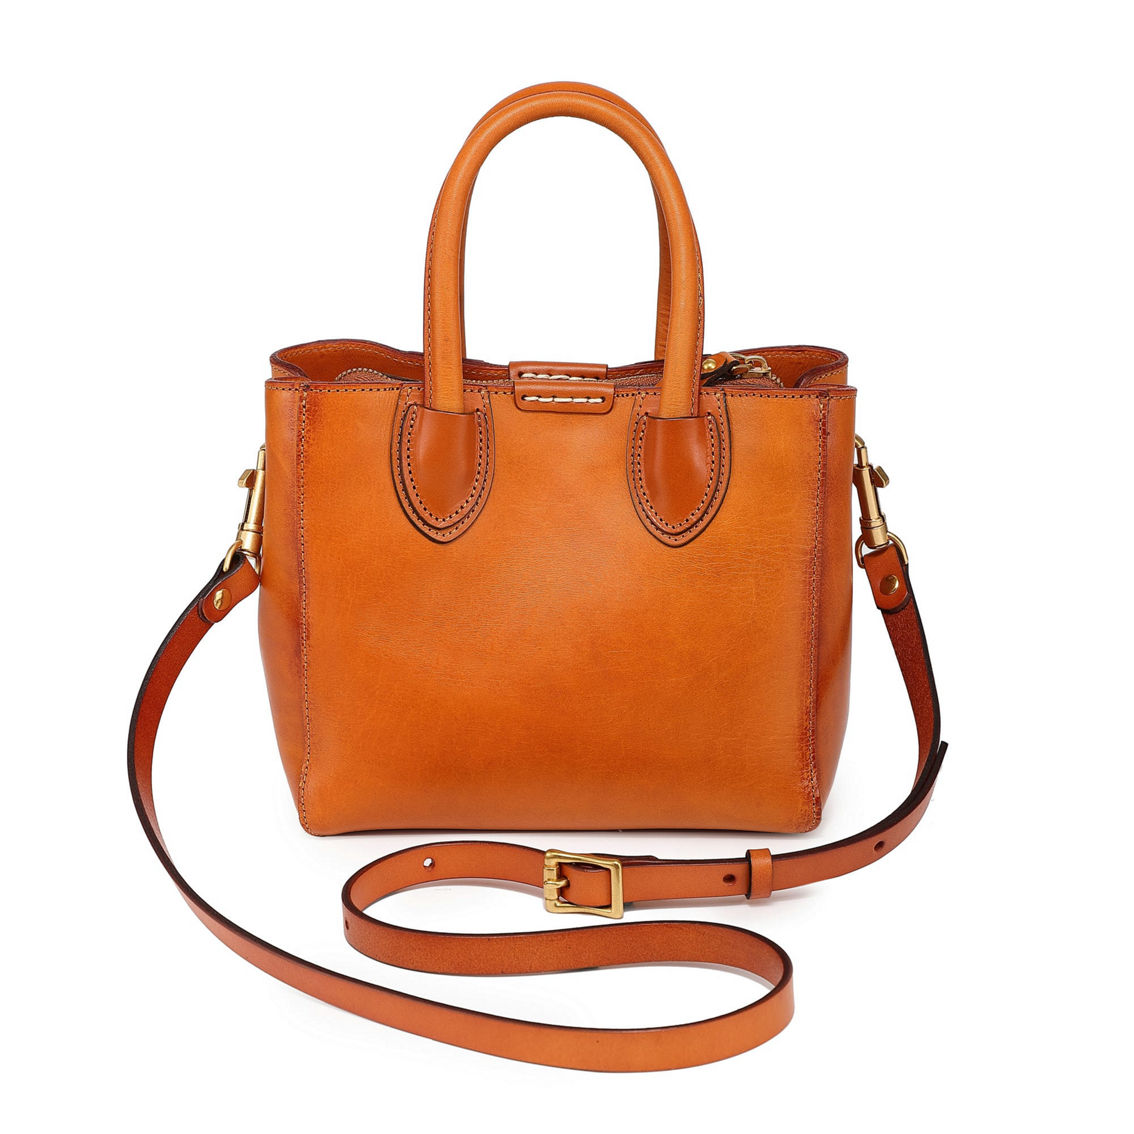 Old Trend Dahlia Convertible Leather Mini Tote - Image 4 of 5